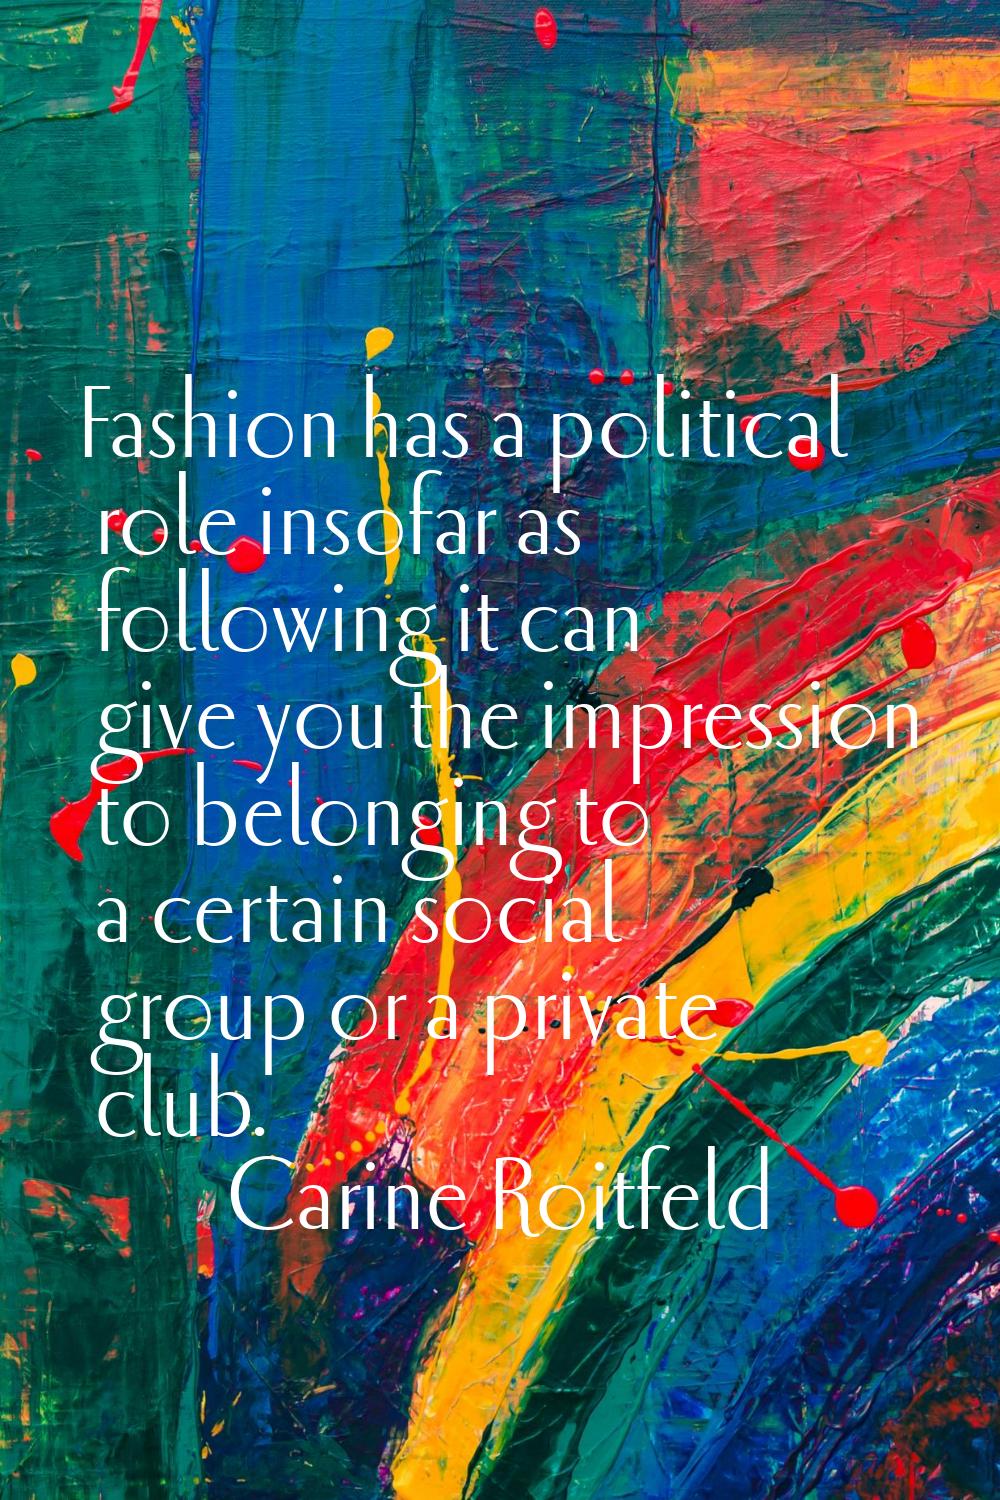 Fashion has a political role insofar as following it can give you the impression to belonging to a 